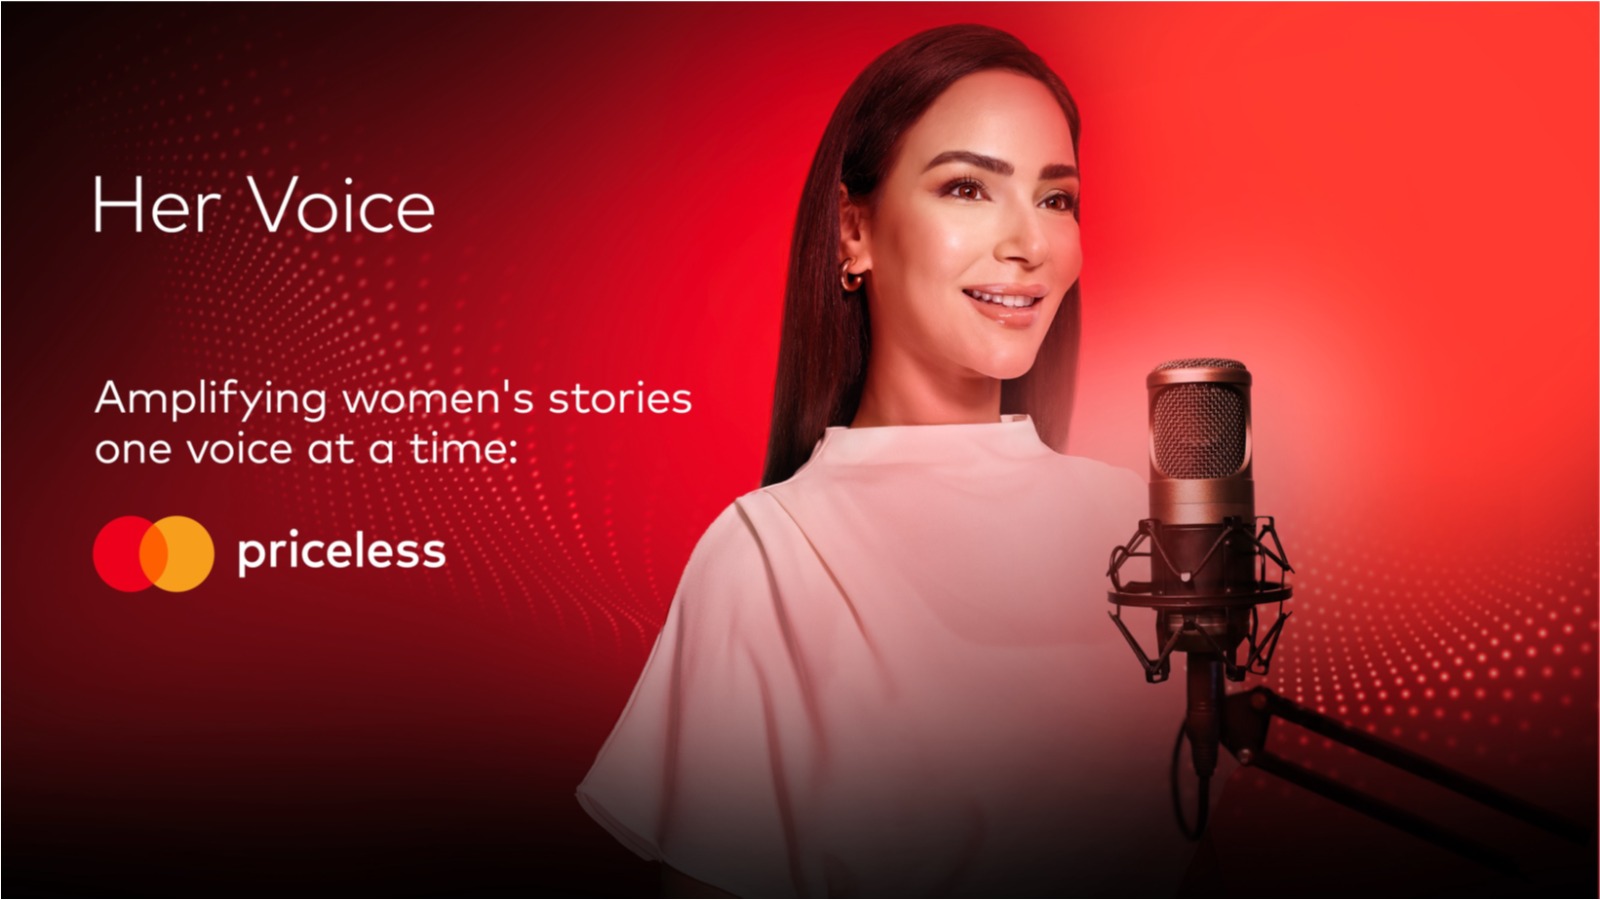 Mastercard launches ‘Her Voice’ podcast series in Egypt to inspire the next generation of female changemakers